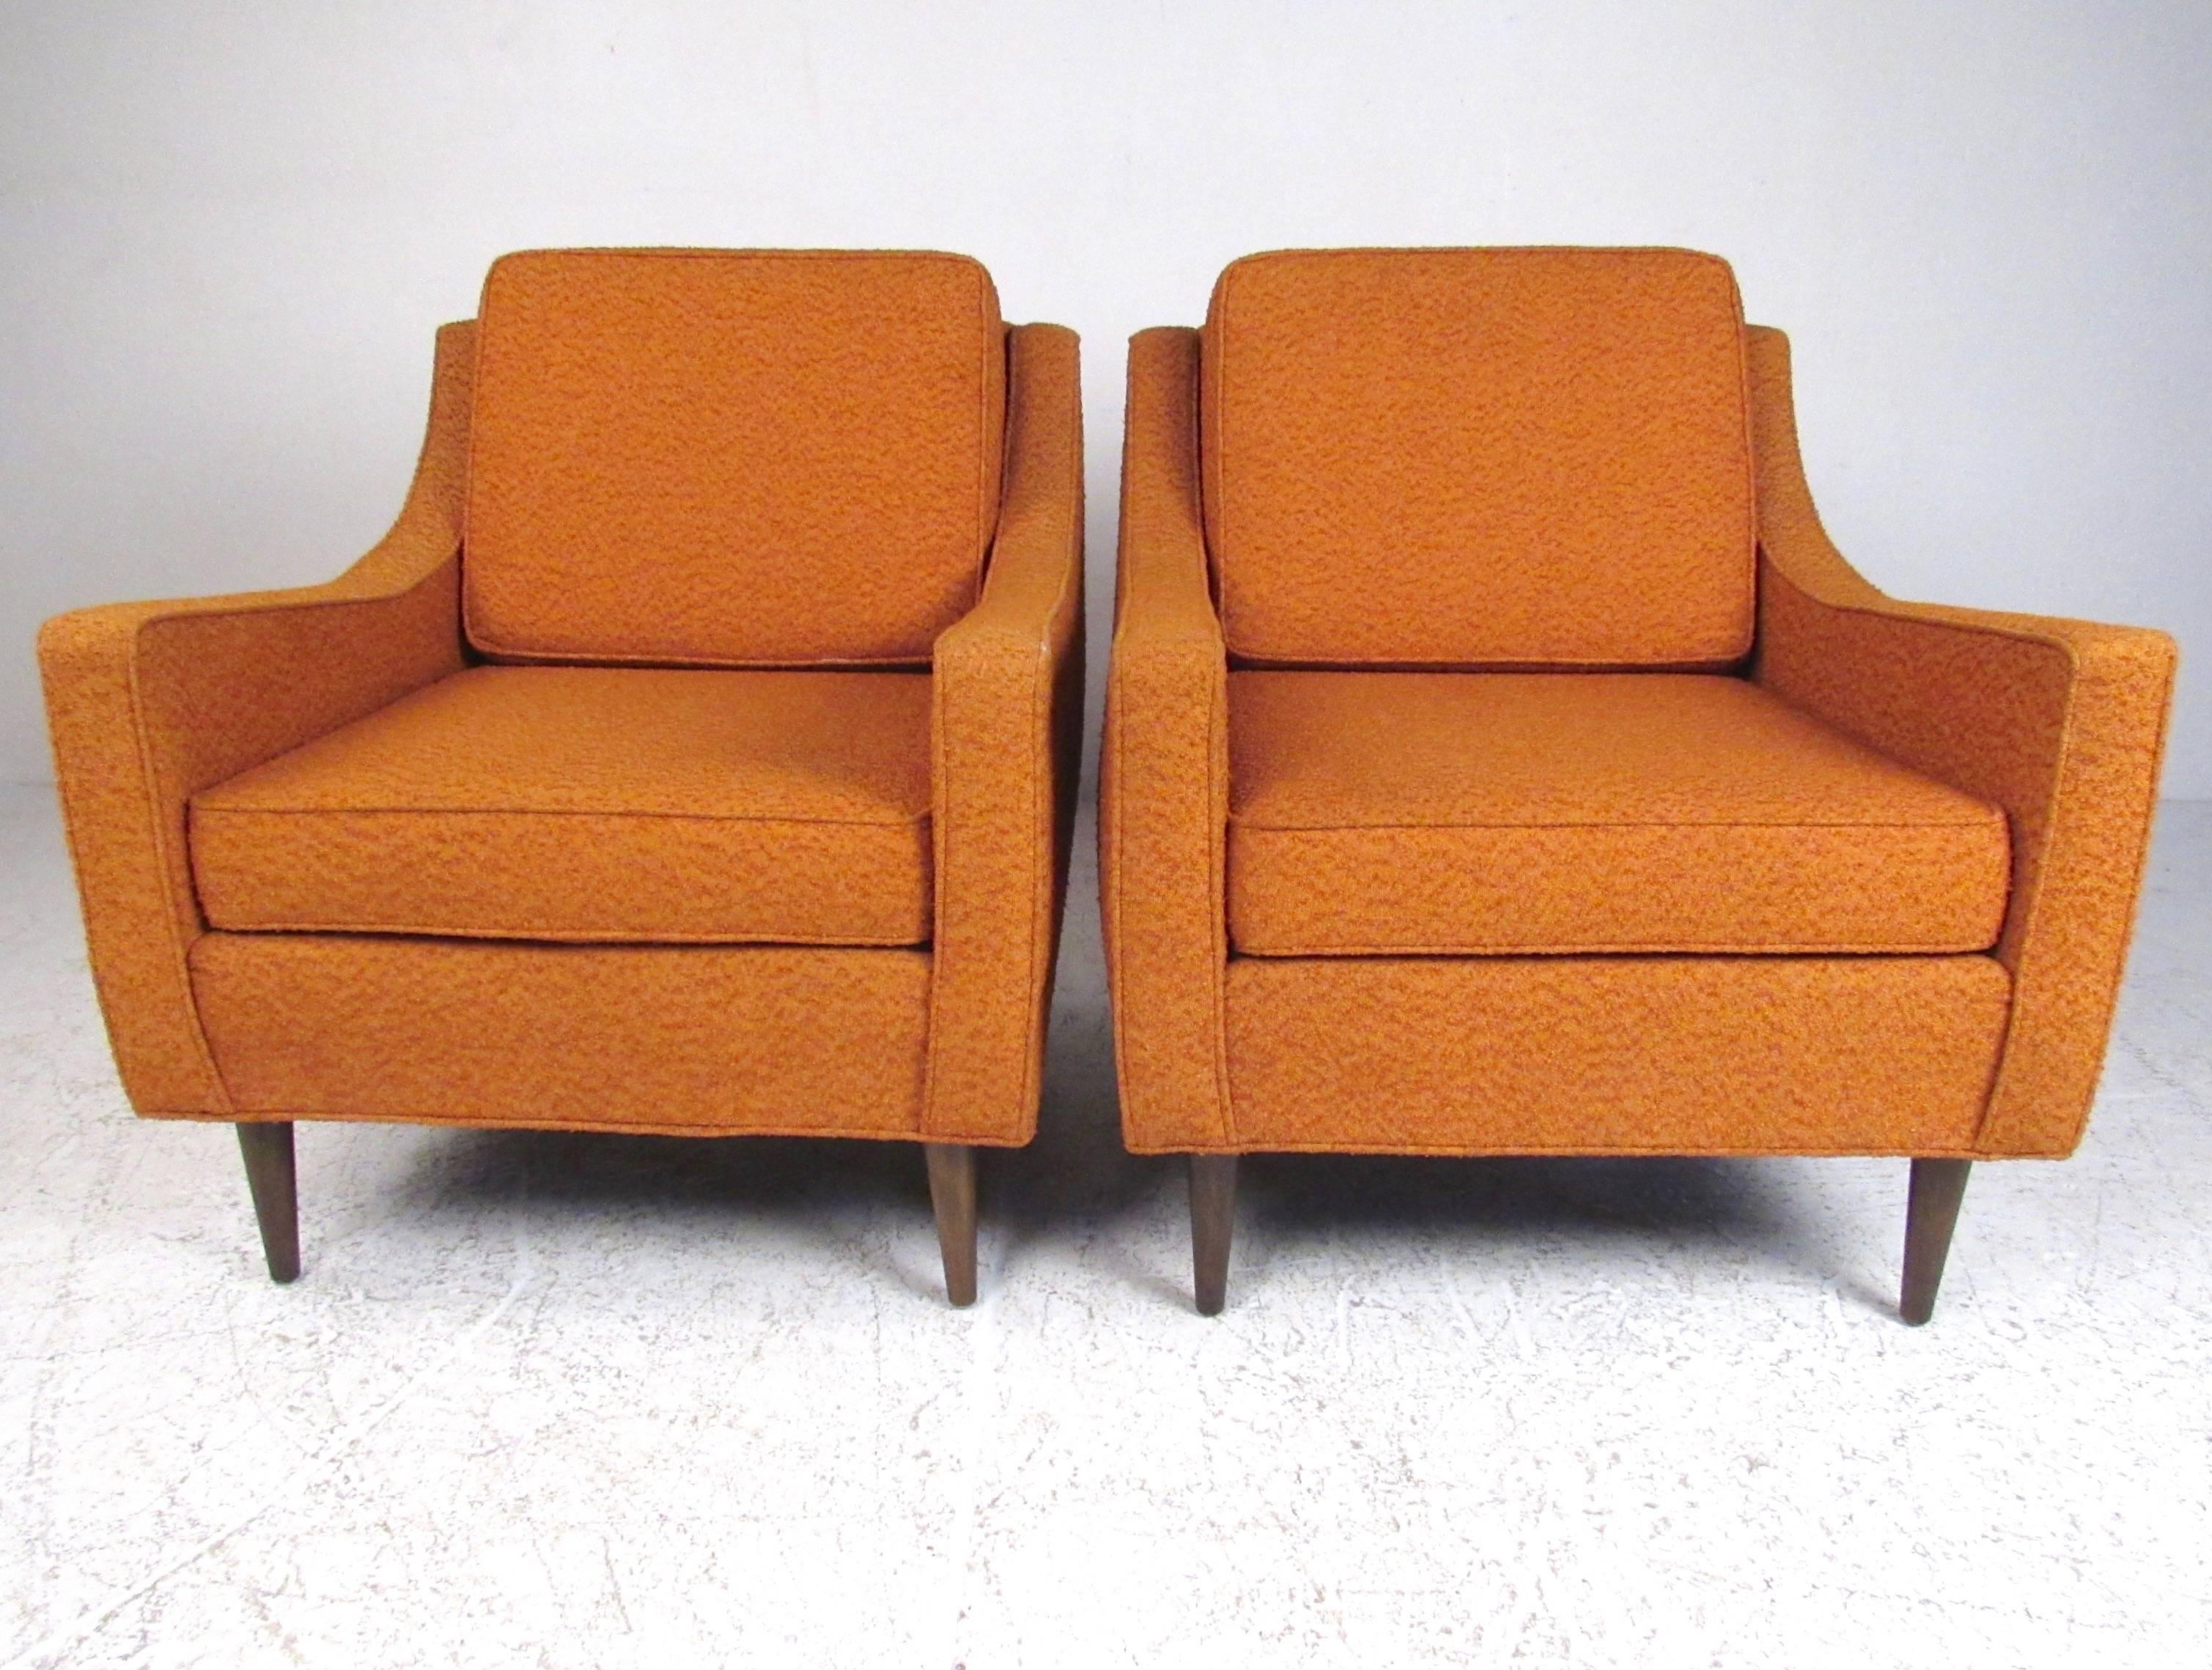 This stylish pair of American mid-century modern lounge chairs feature vintage 